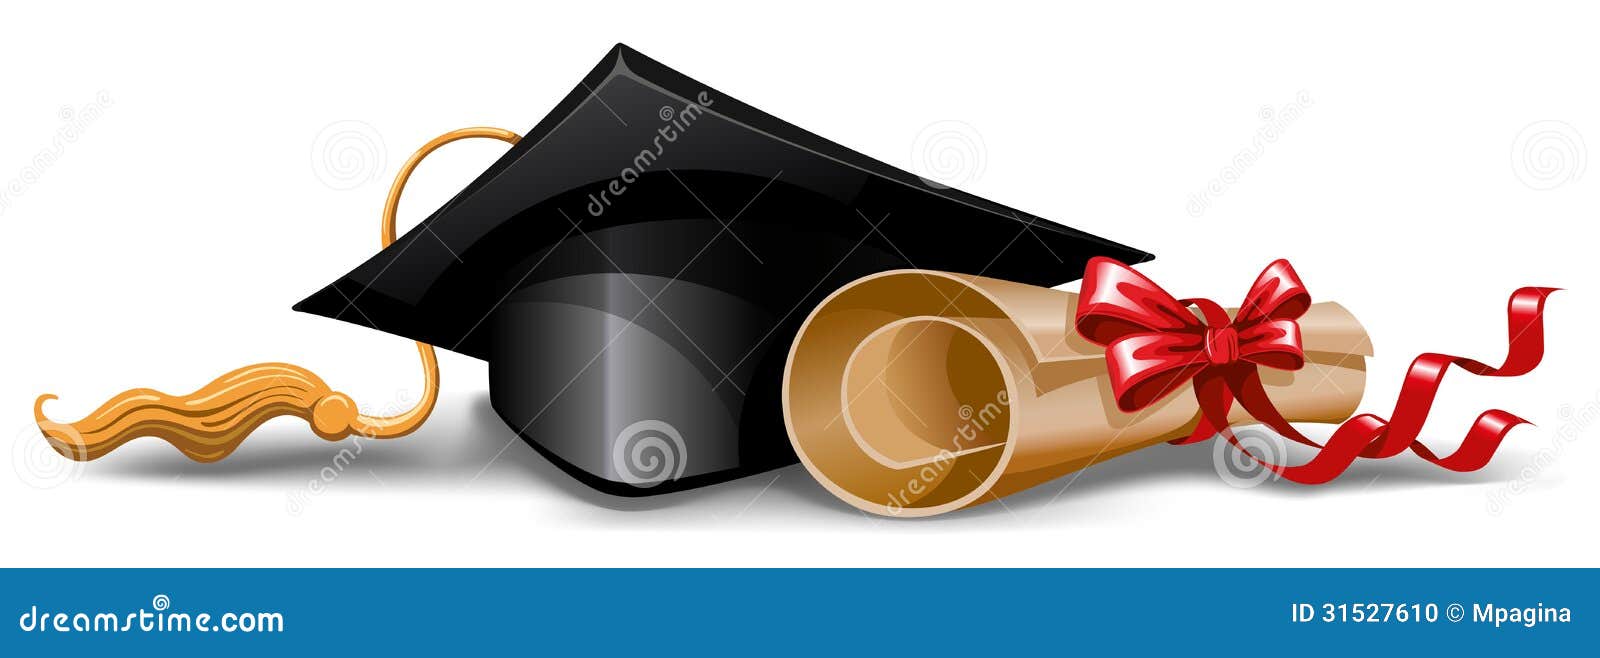 Graduation cap and diploma stock vector. Illustration of abstract ...